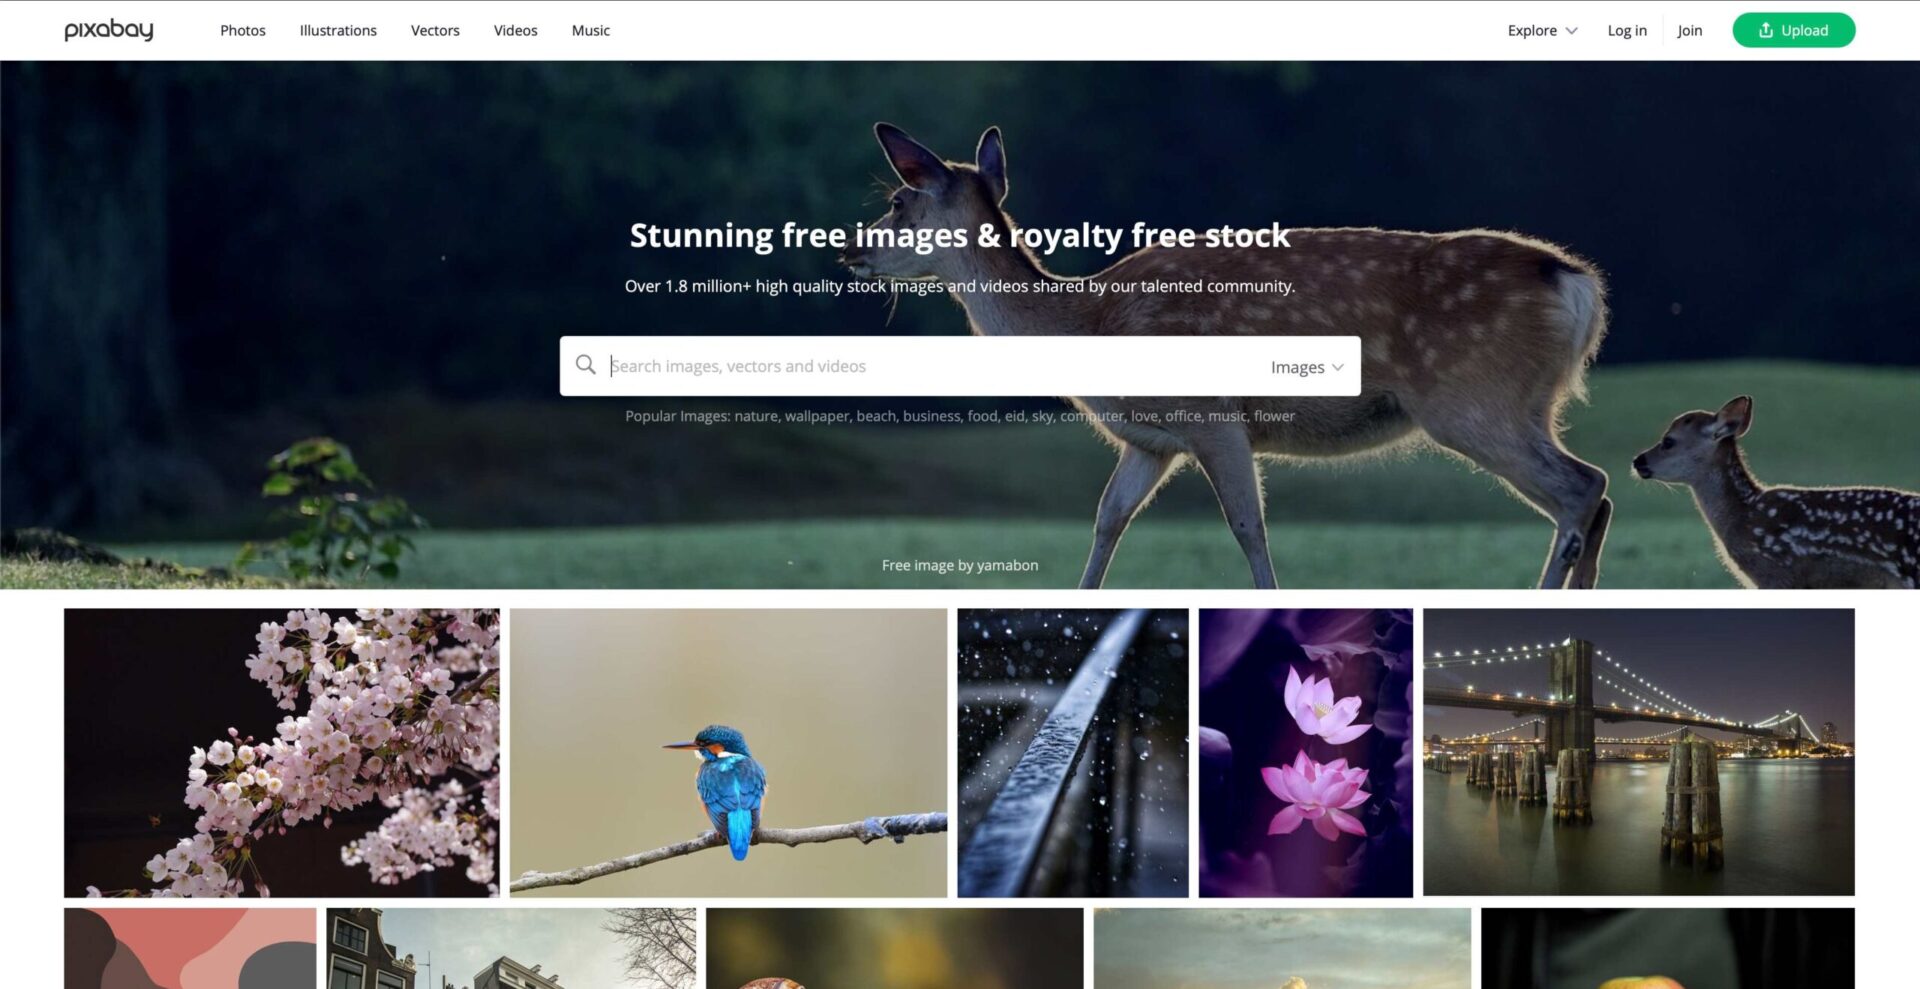 15 Free Stock Photography Websites You Should Be Using For Your Next Project - 10 Free Stock Websites pixabay scaled 1